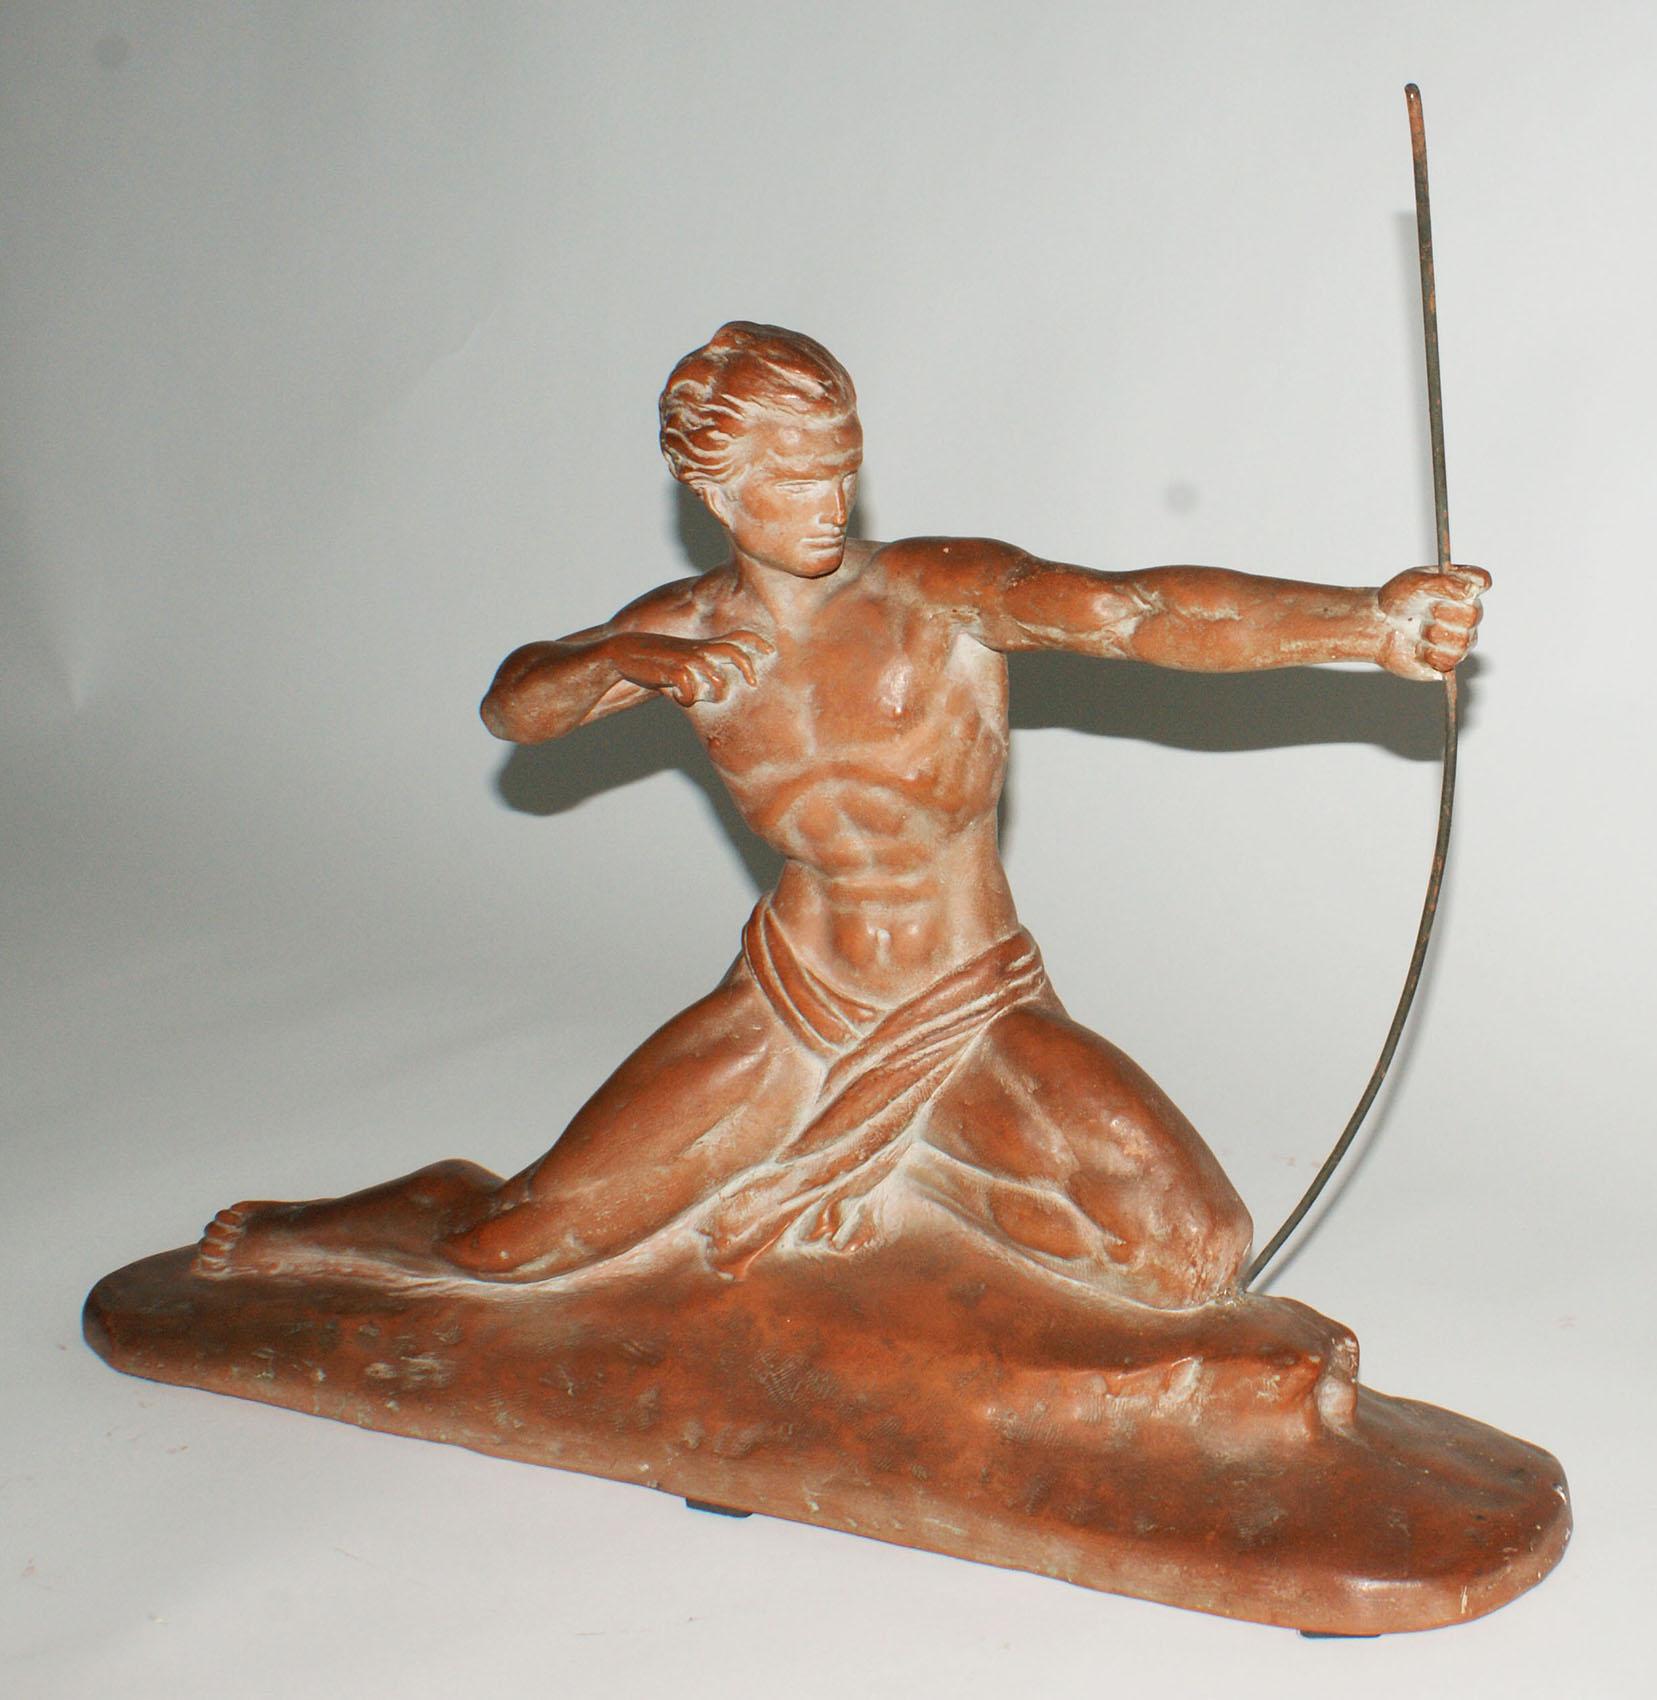 French Art Deco terracotta sculpture showing a hunter kneeling on his leg and holding by the left hand a hunting bow, with the signature of the artist on the base.